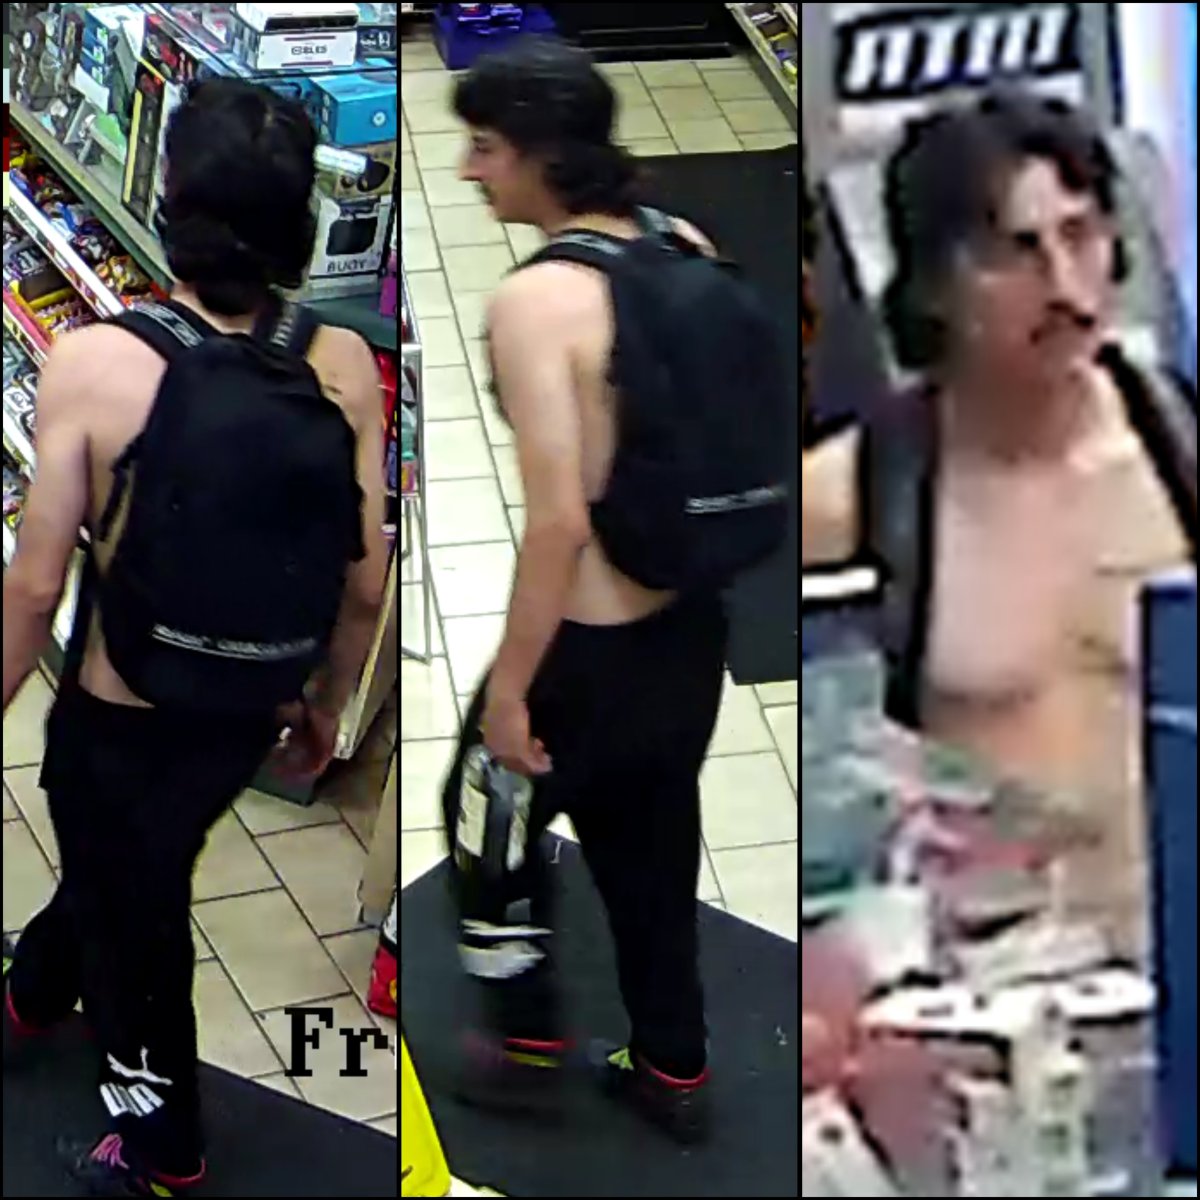 London police are asking the pubic to help identify the pictured individual.